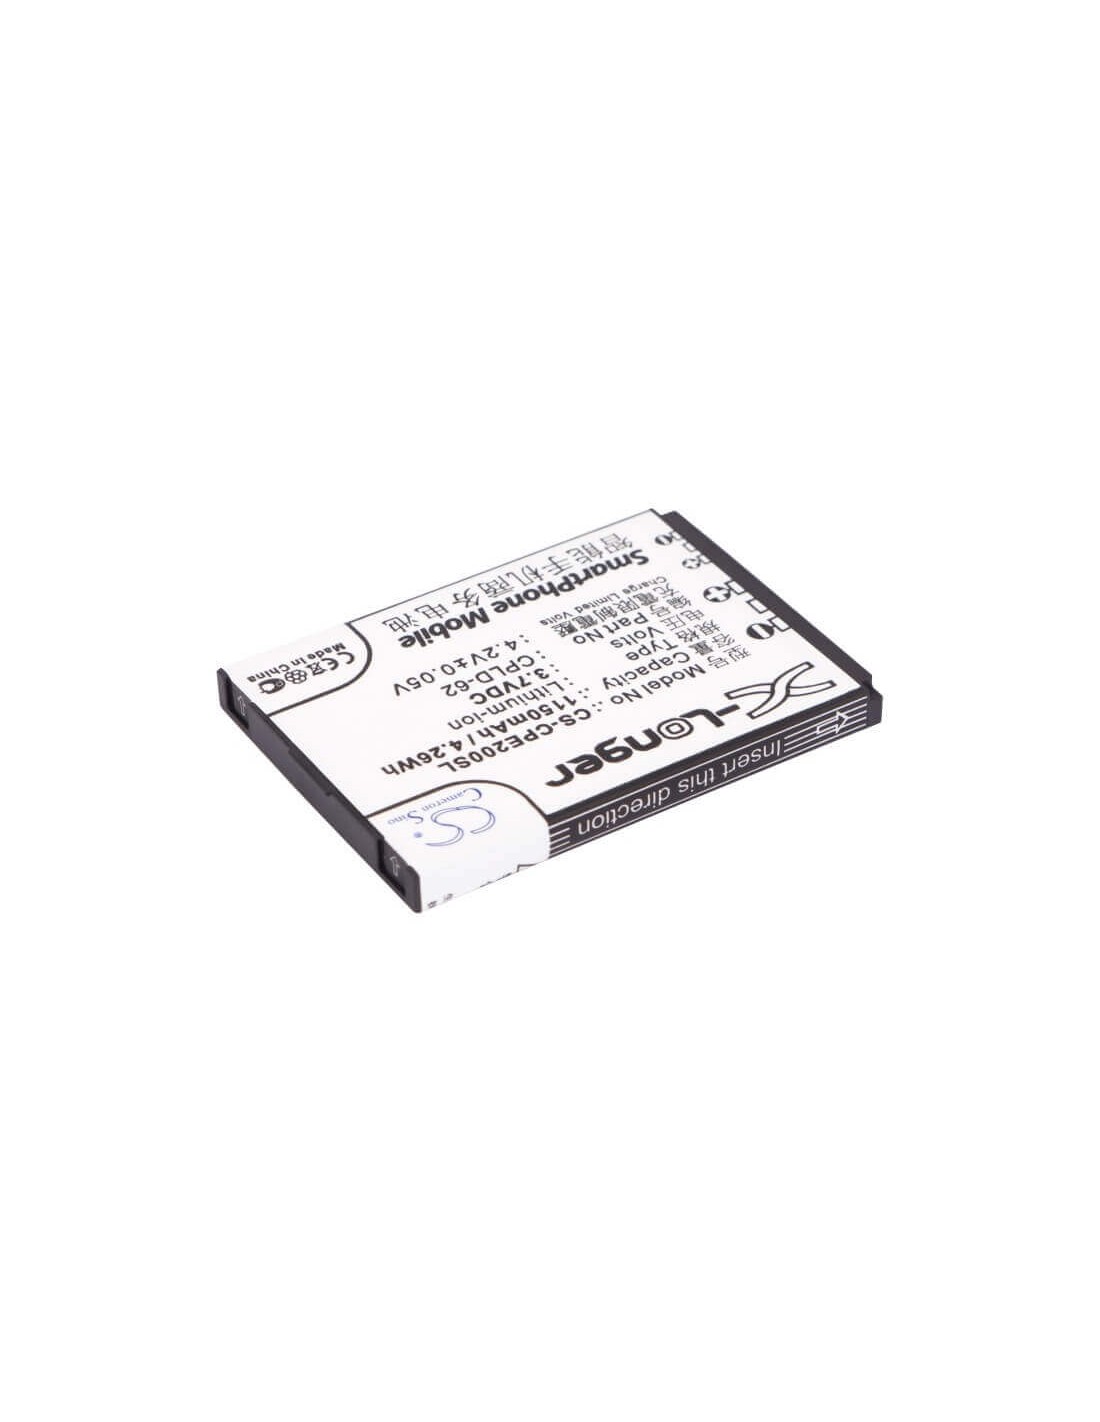 Battery for Coolpad 5800, D520, D550 3.7V, 1150mAh - 4.26Wh